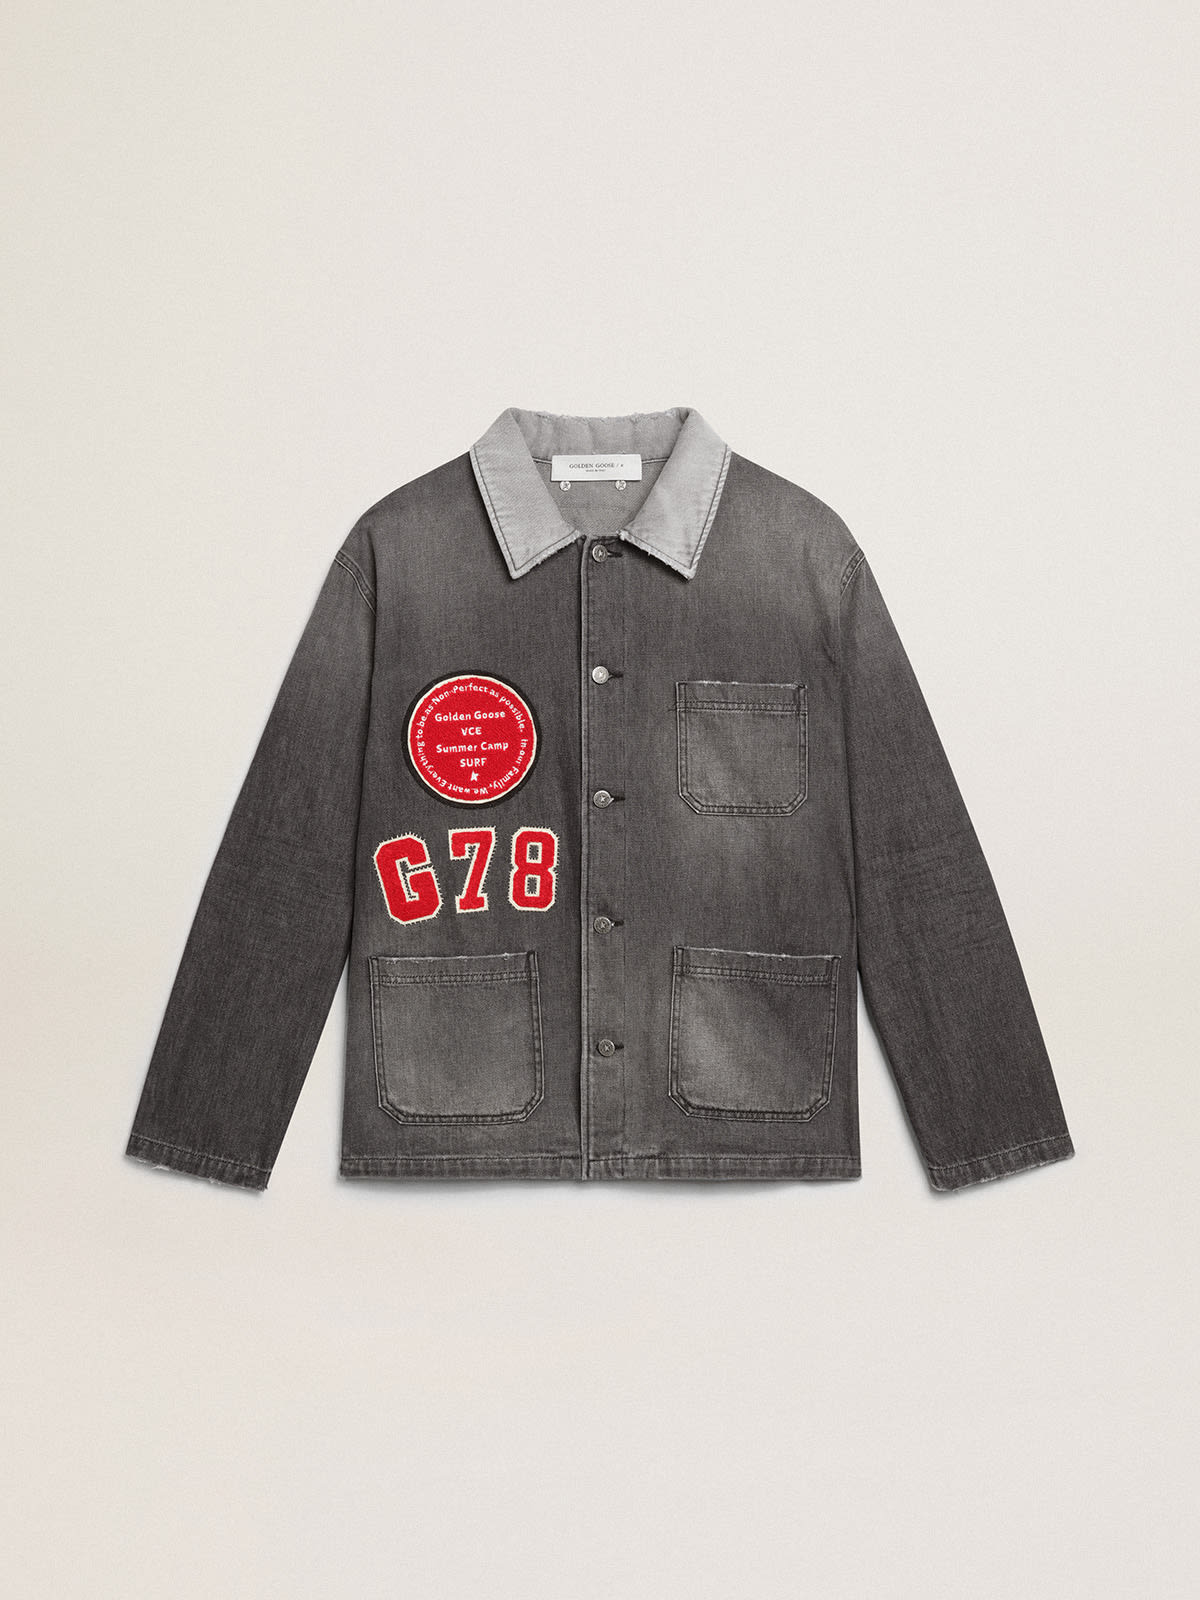 Golden Goose - Black denim shirt with patches in 